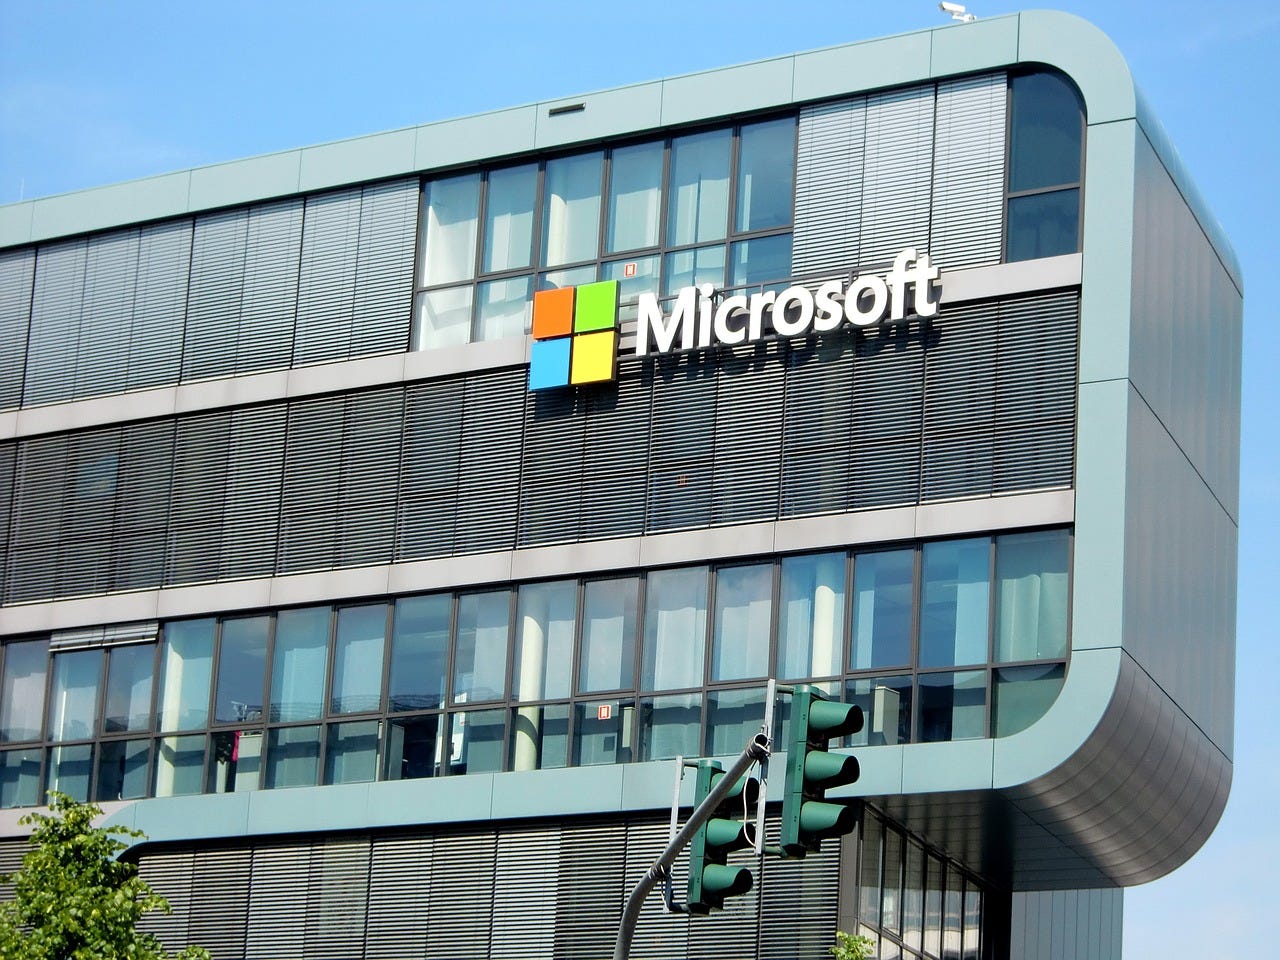 Microsoft's Online Service Terms Spark New Privacy Concerns - SiliconANGLE